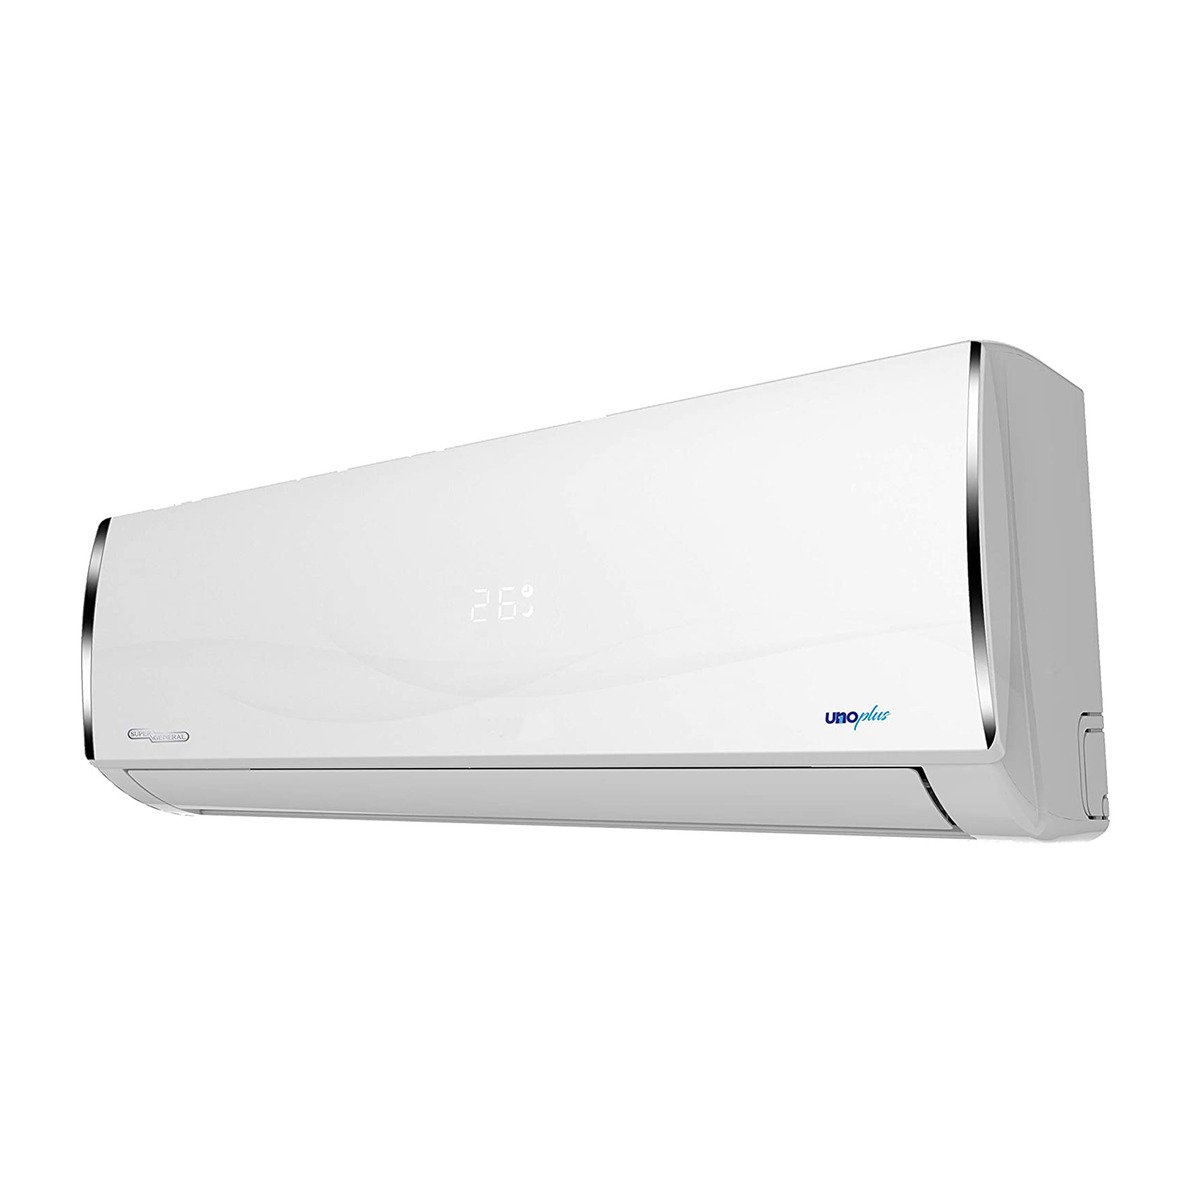 Super General Split Air Conditioner KSGS181GER 1.5Ton Hot and Cool